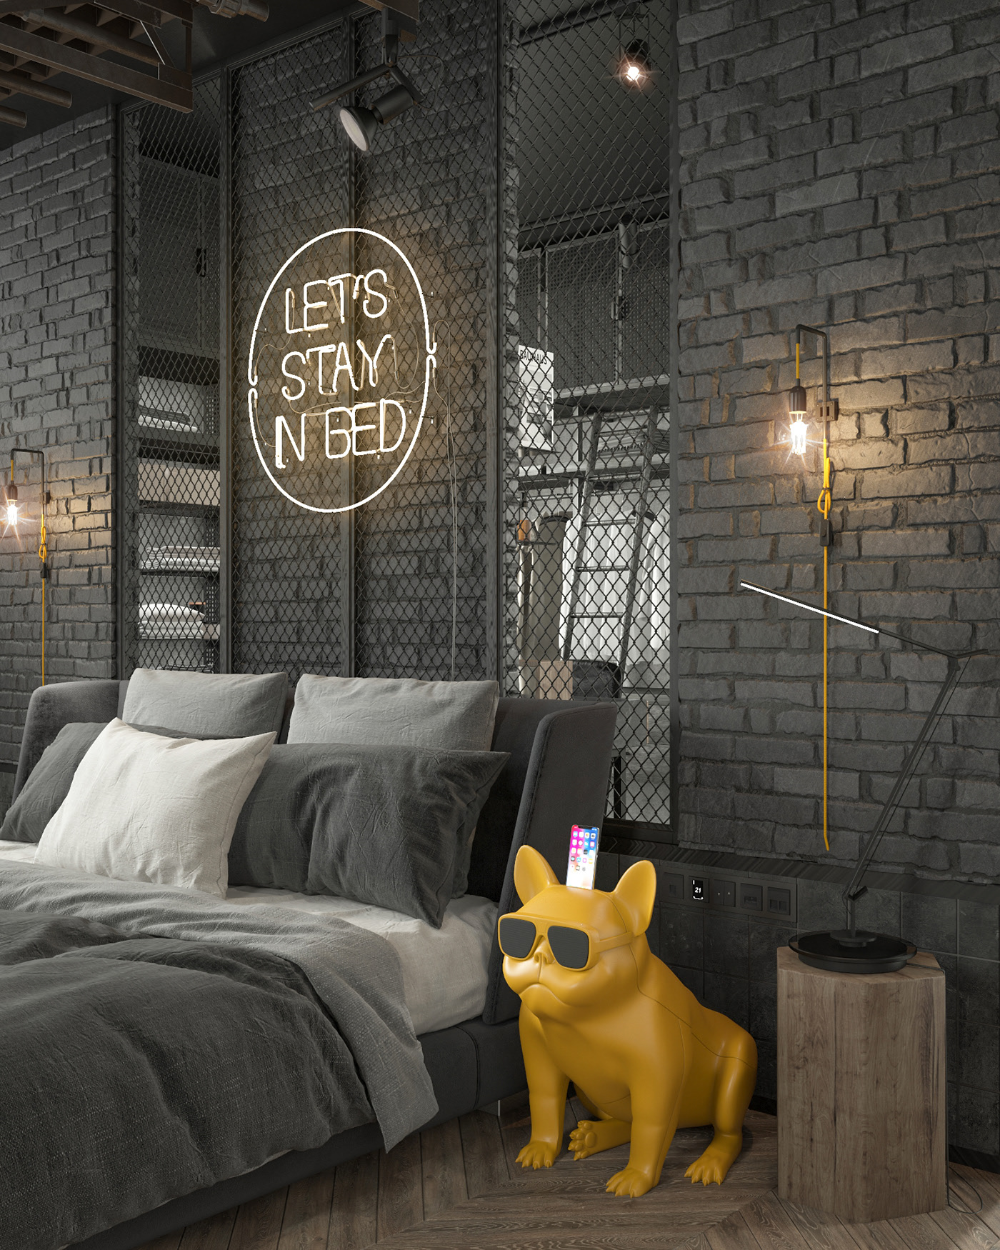 Matching Industrial Bedroom and Eccentric Accents